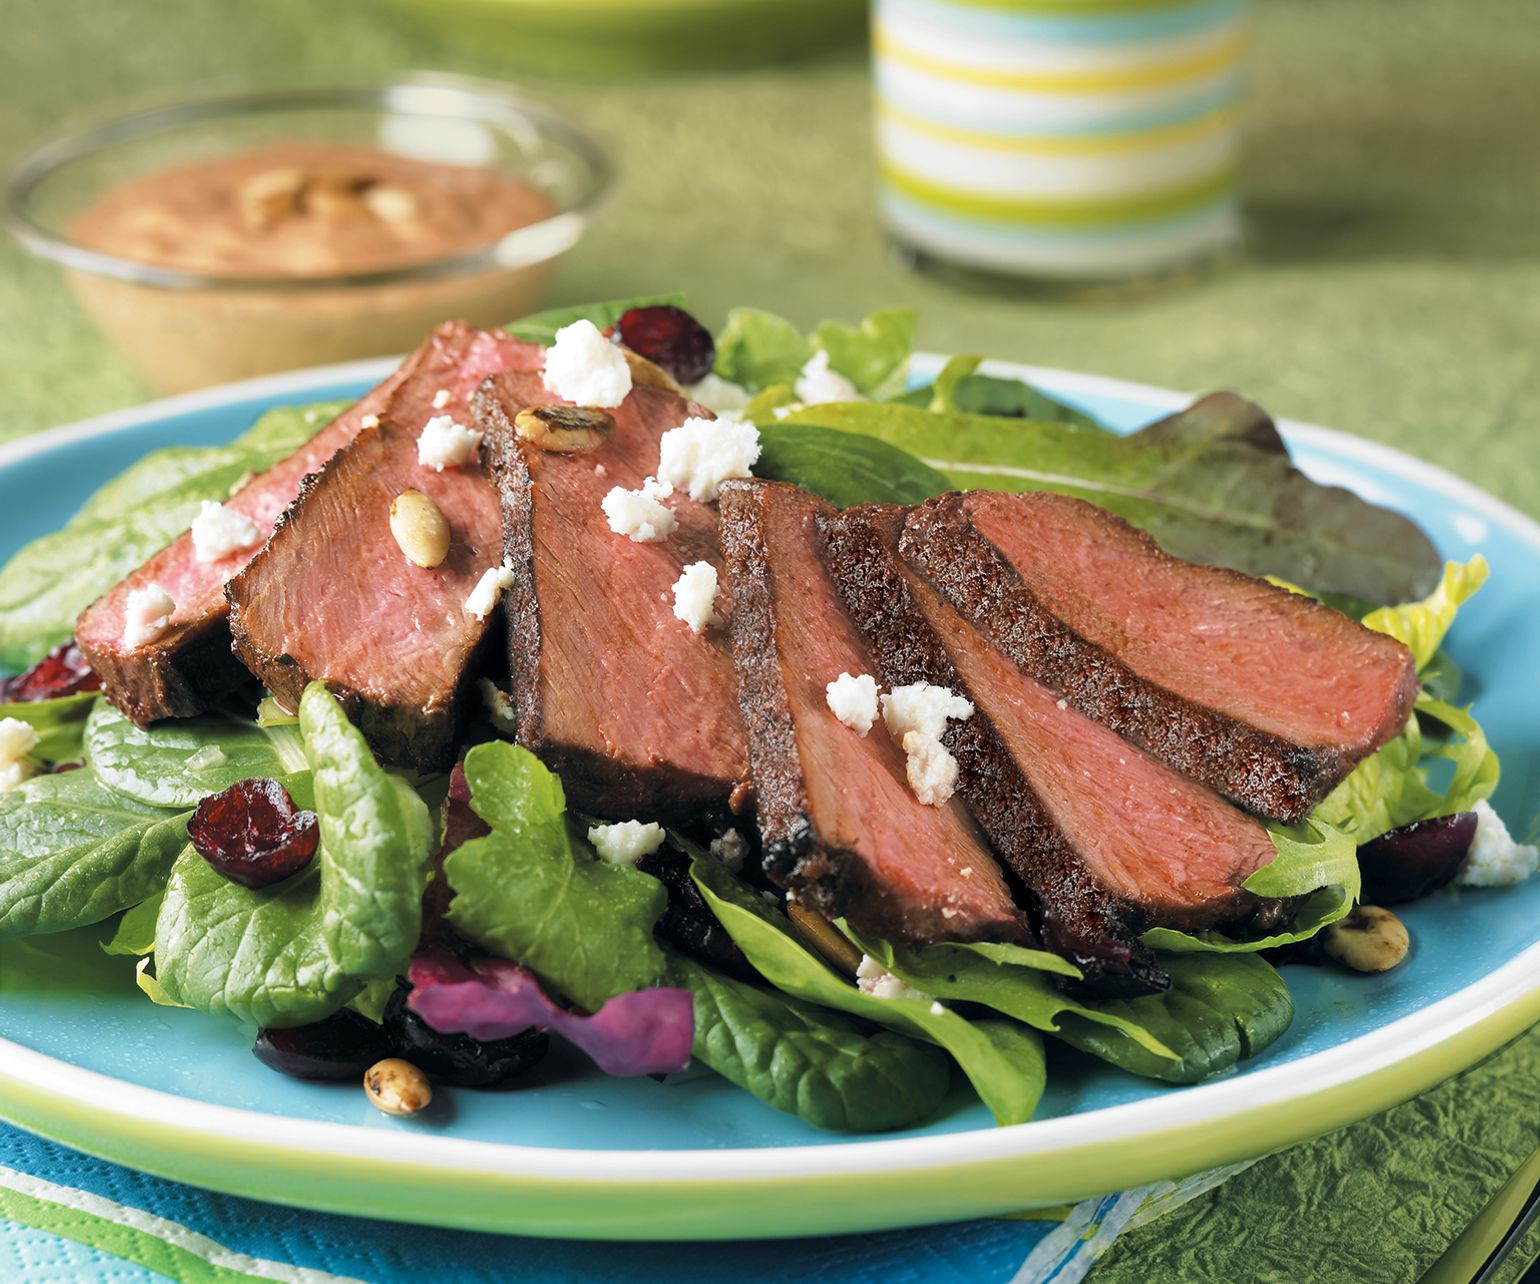 South-of-the-Border Steak Salad with Creamy Taco Dressing